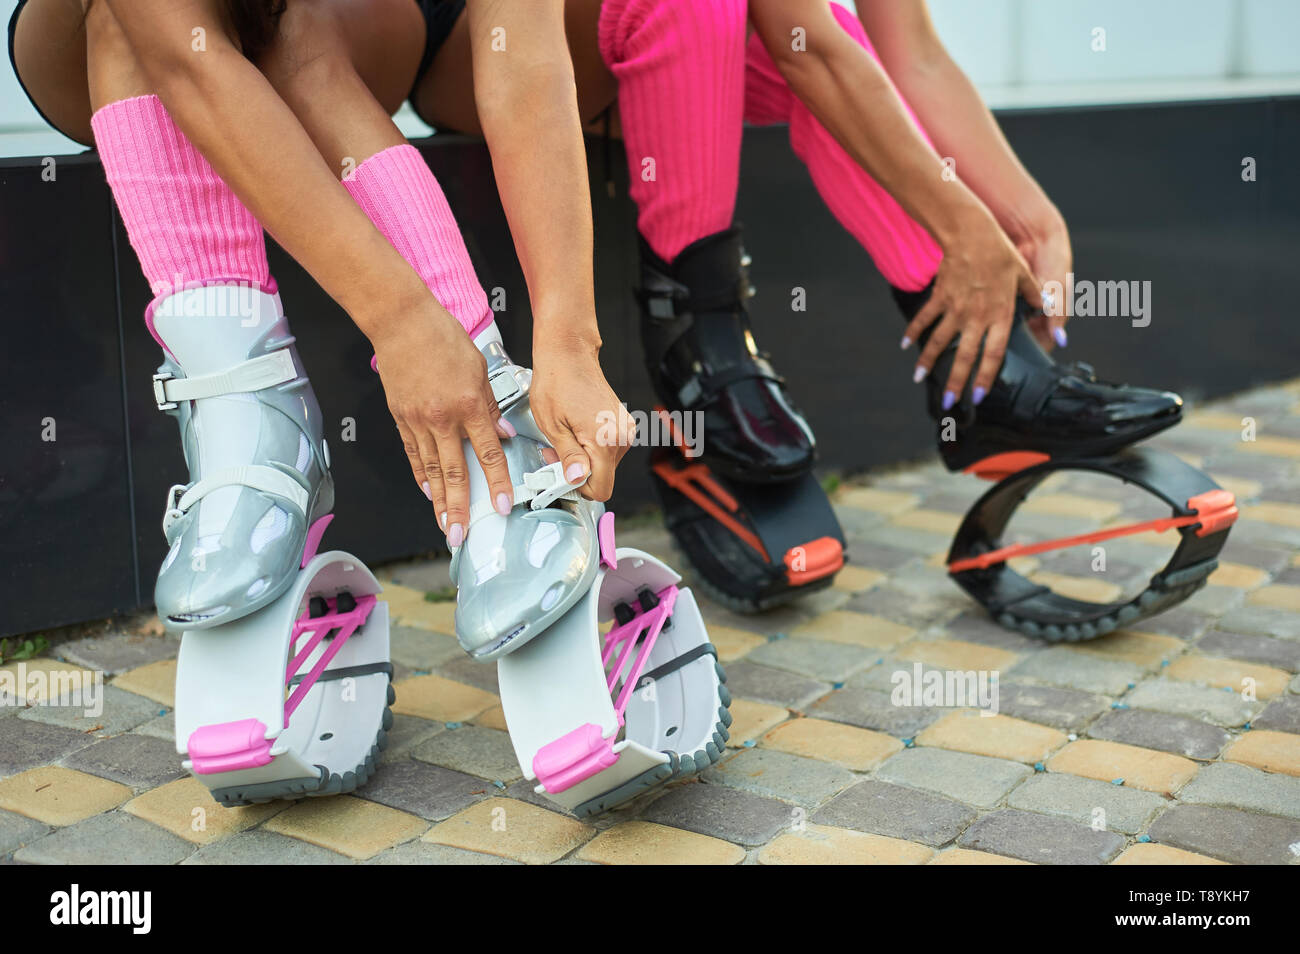 two women put on kangoo jumping boots before workout. Closeup shot with  hands Stock Photo - Alamy